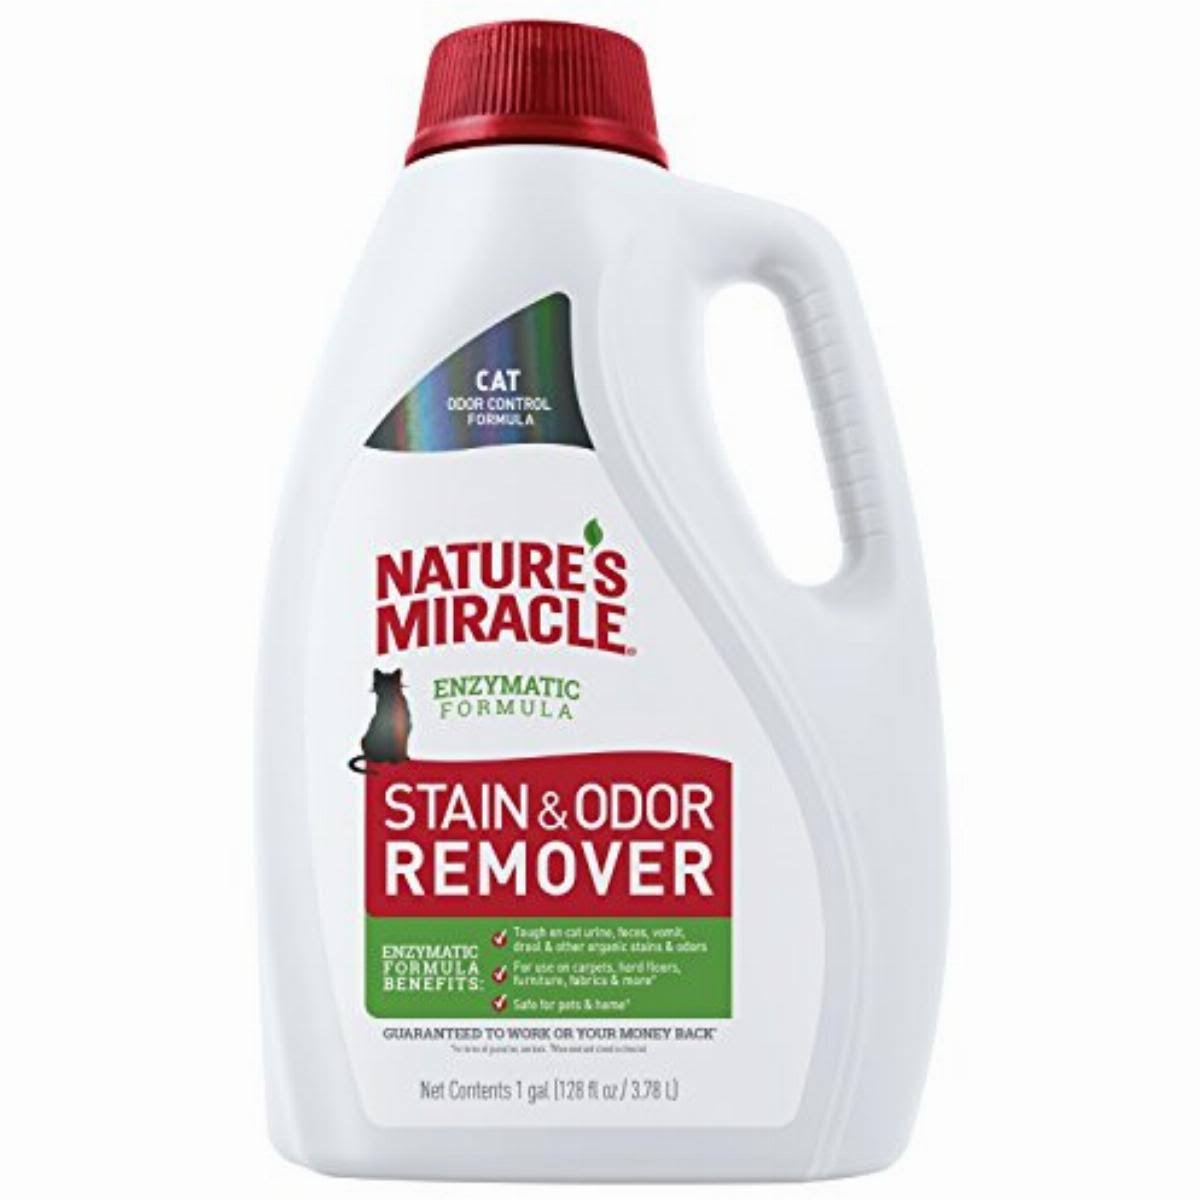 Natures Miracle Stain and Odor Remover - 1gal